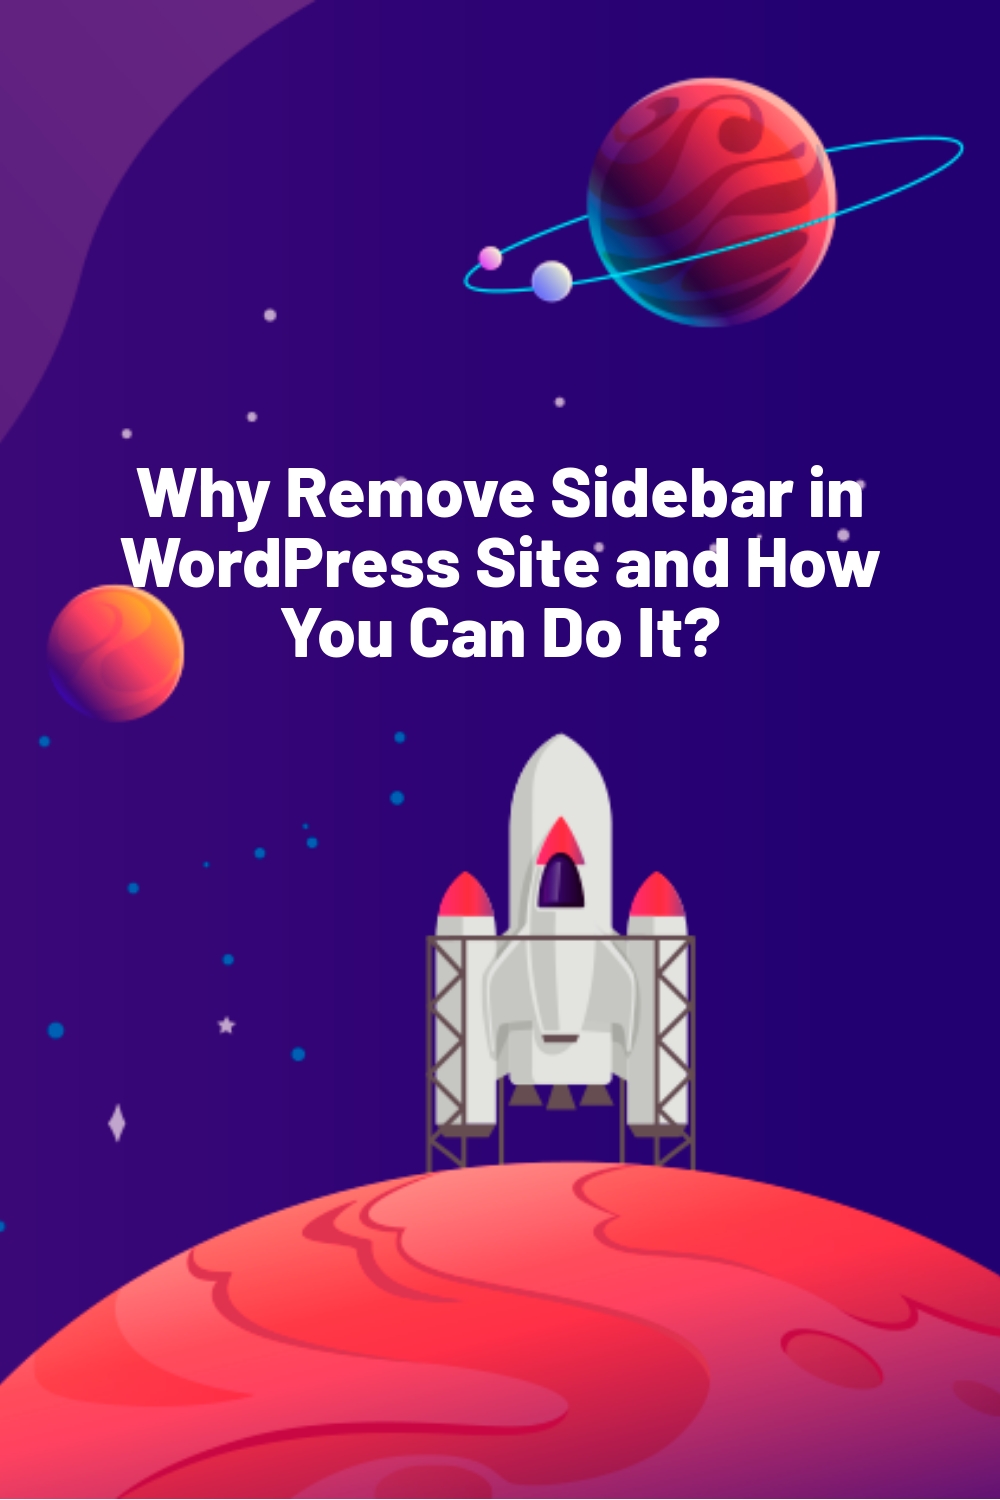 Why Remove Sidebar in WordPress Site and How You Can Do It?